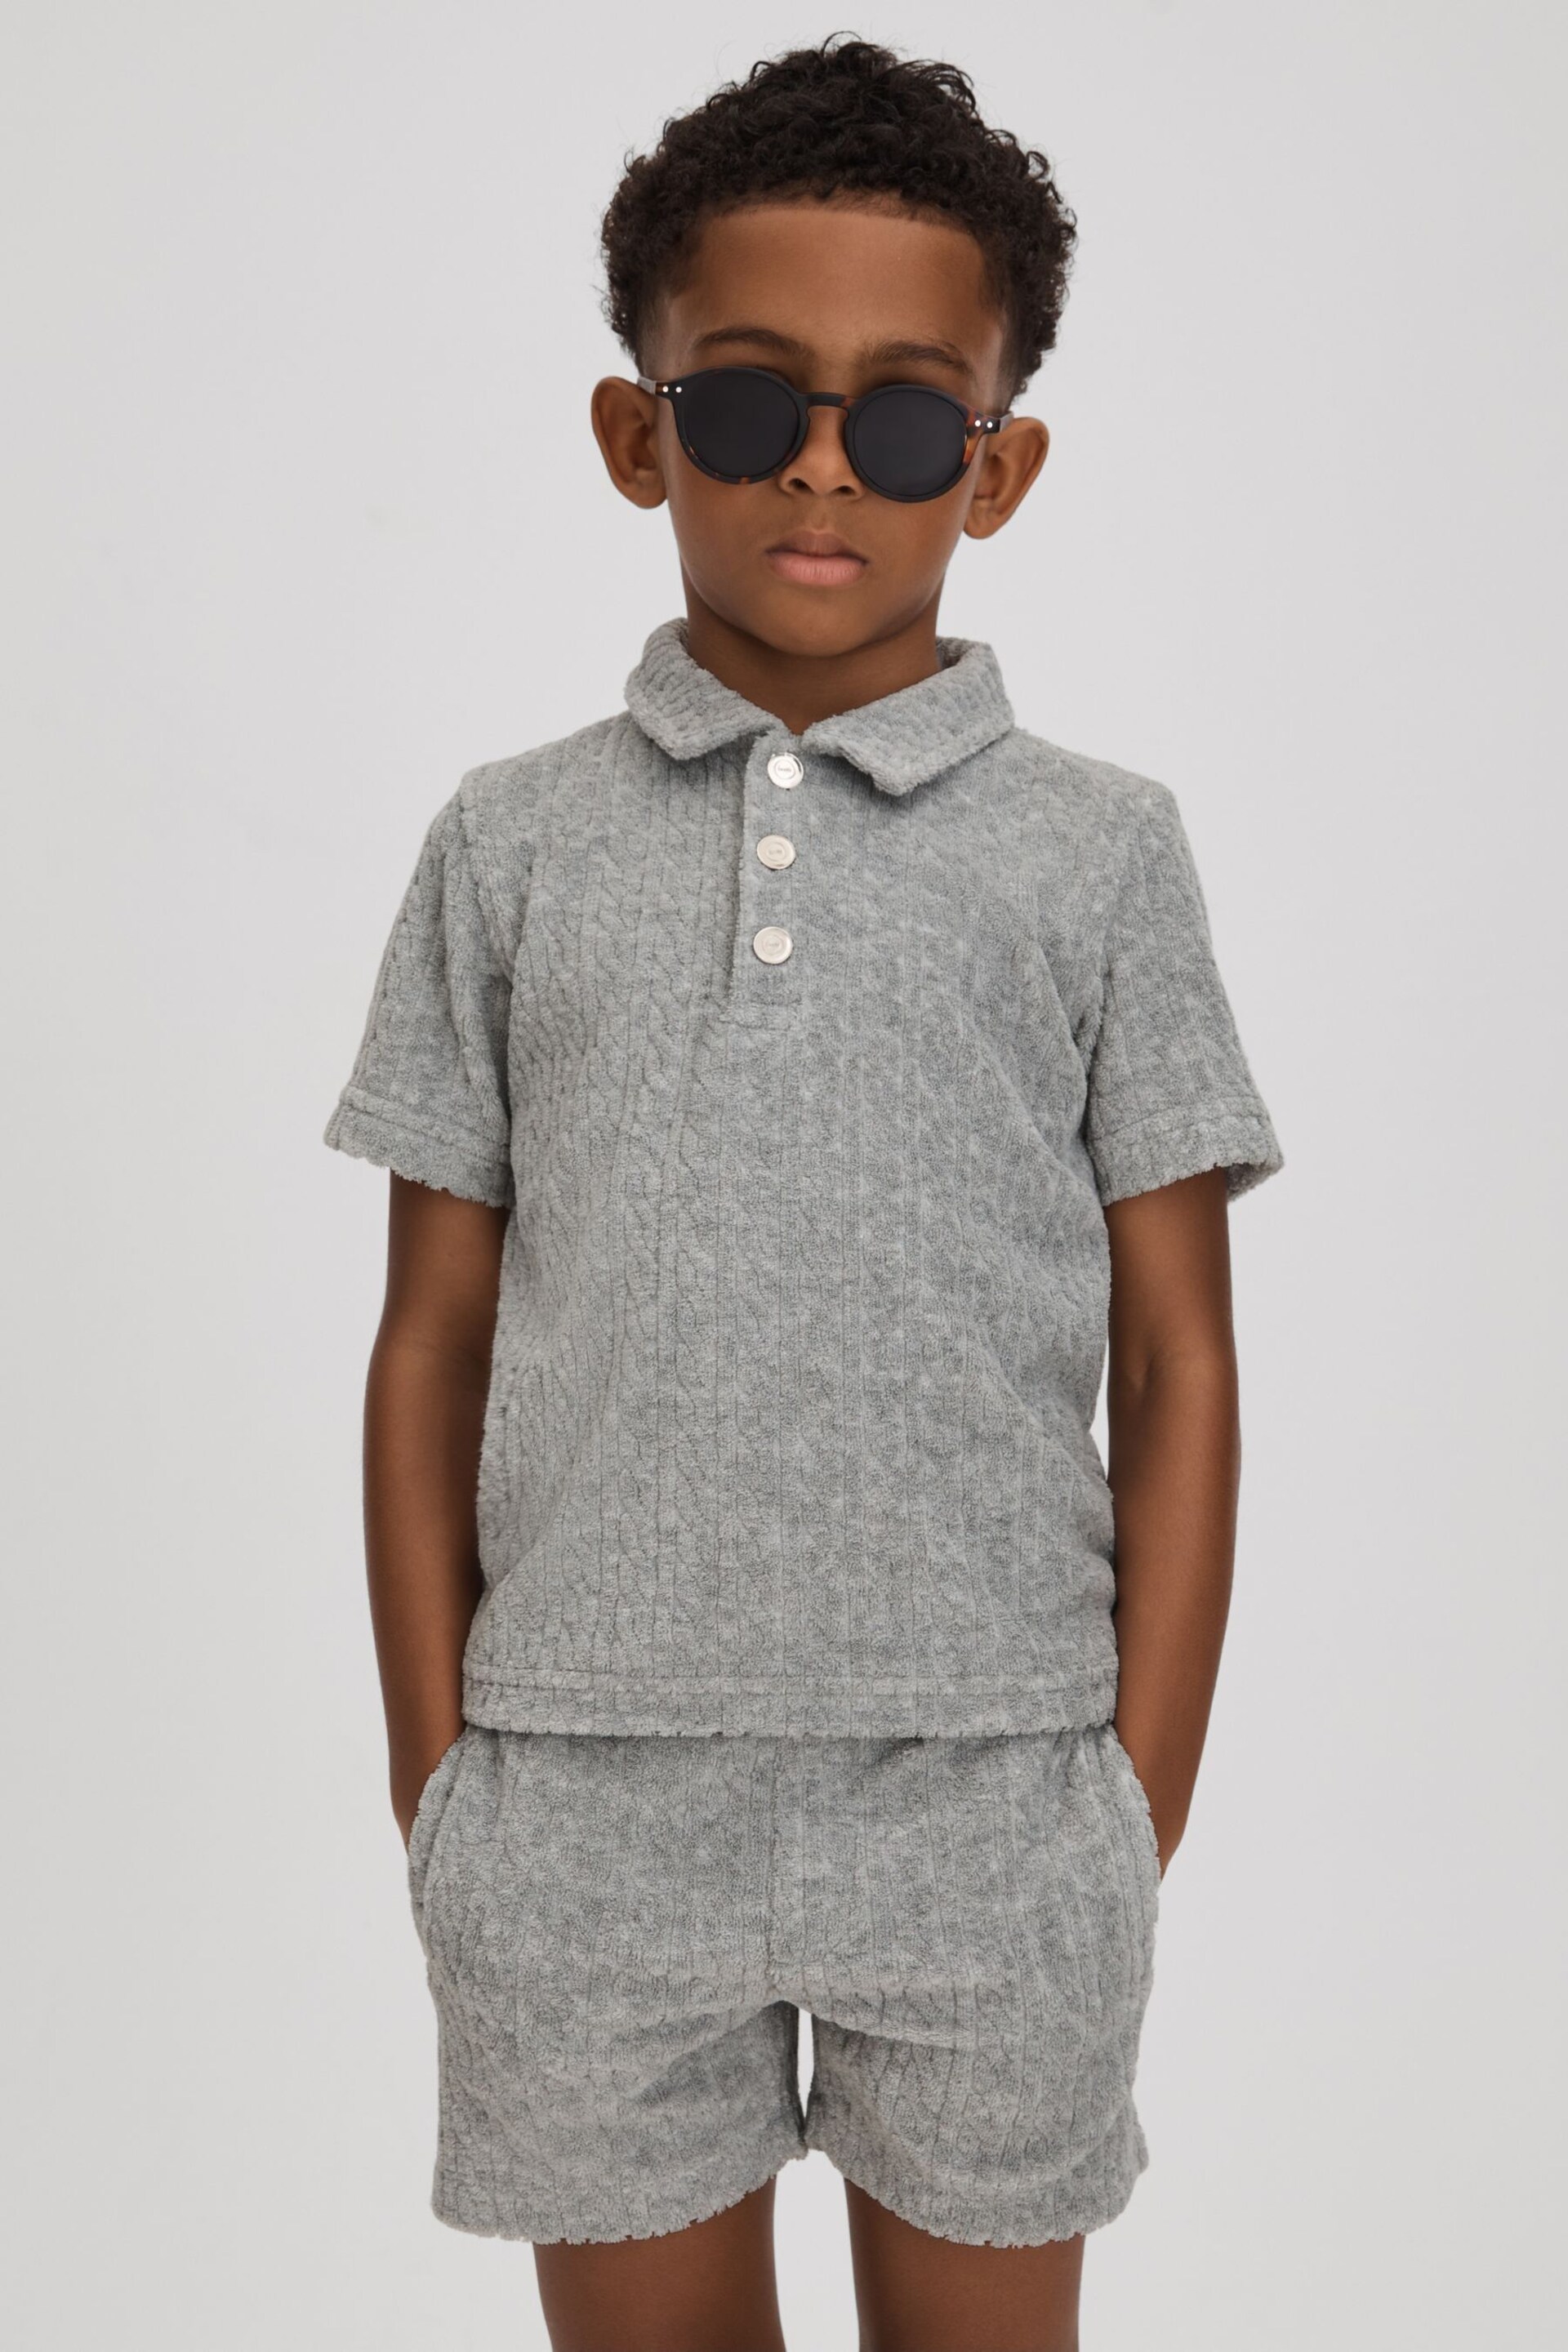 Reiss Soft Grey Iggy Teen Towelling Polo Shirt - Image 2 of 4